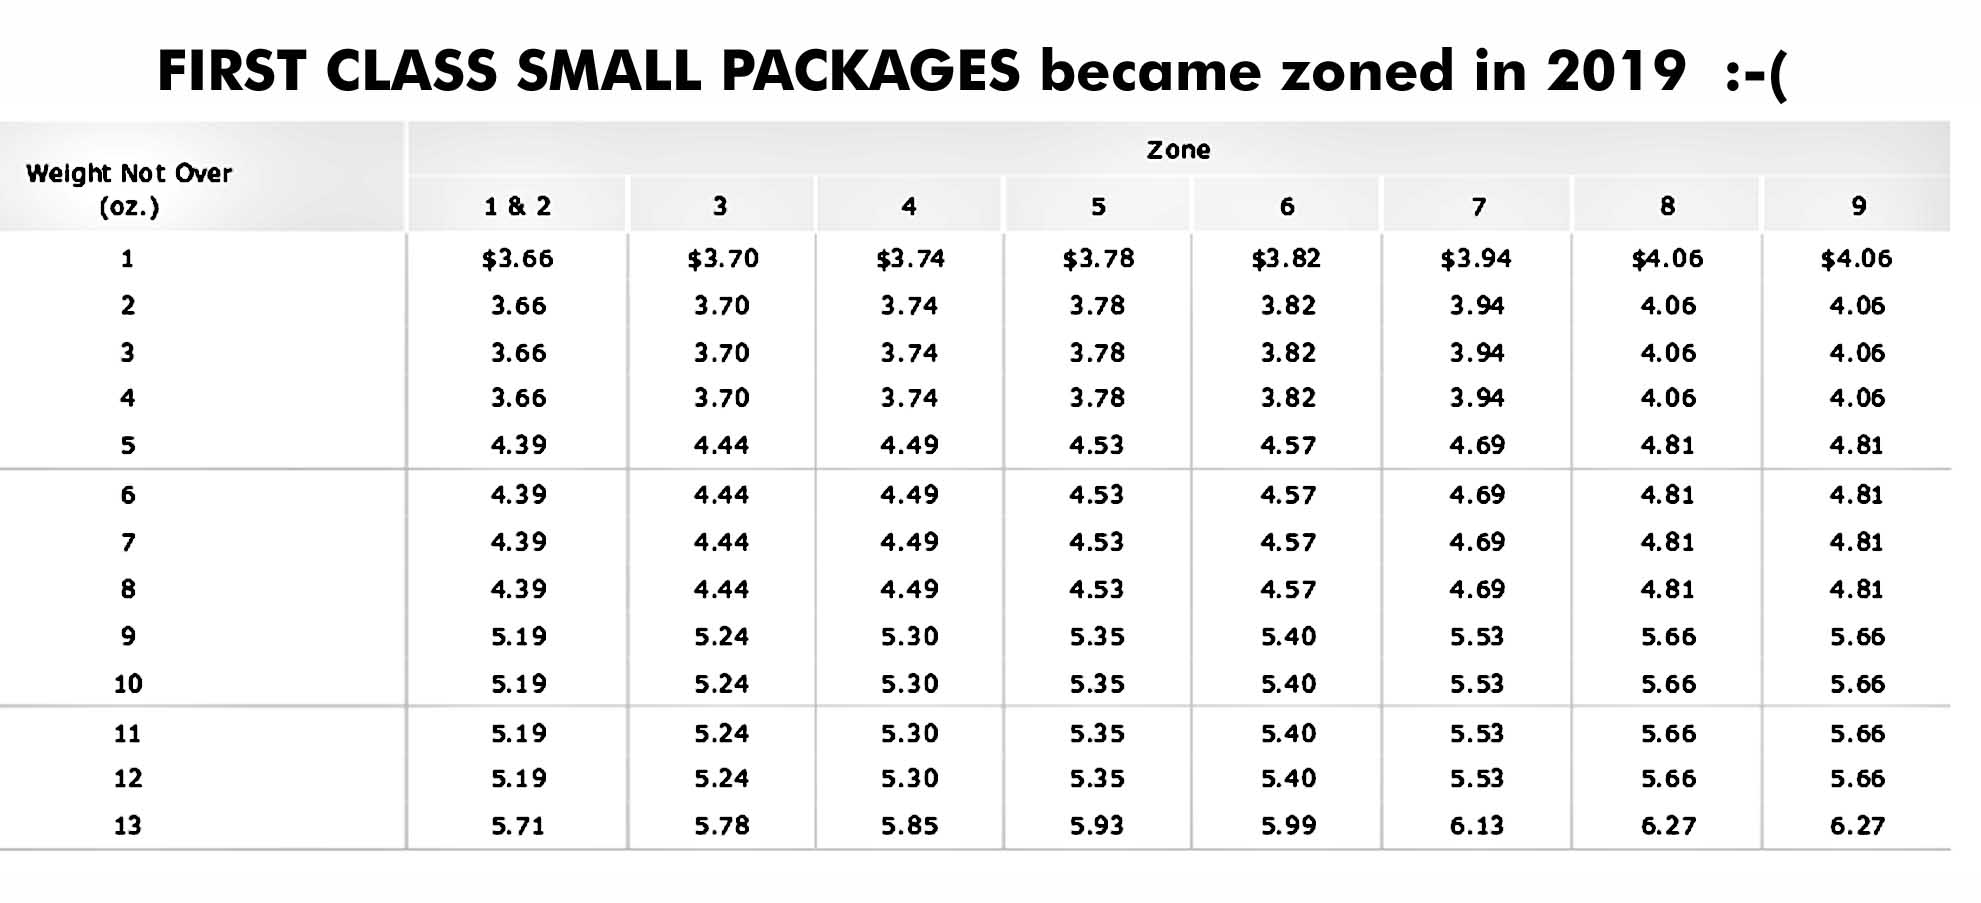 Current USPS Postage Rate Charts simple tables